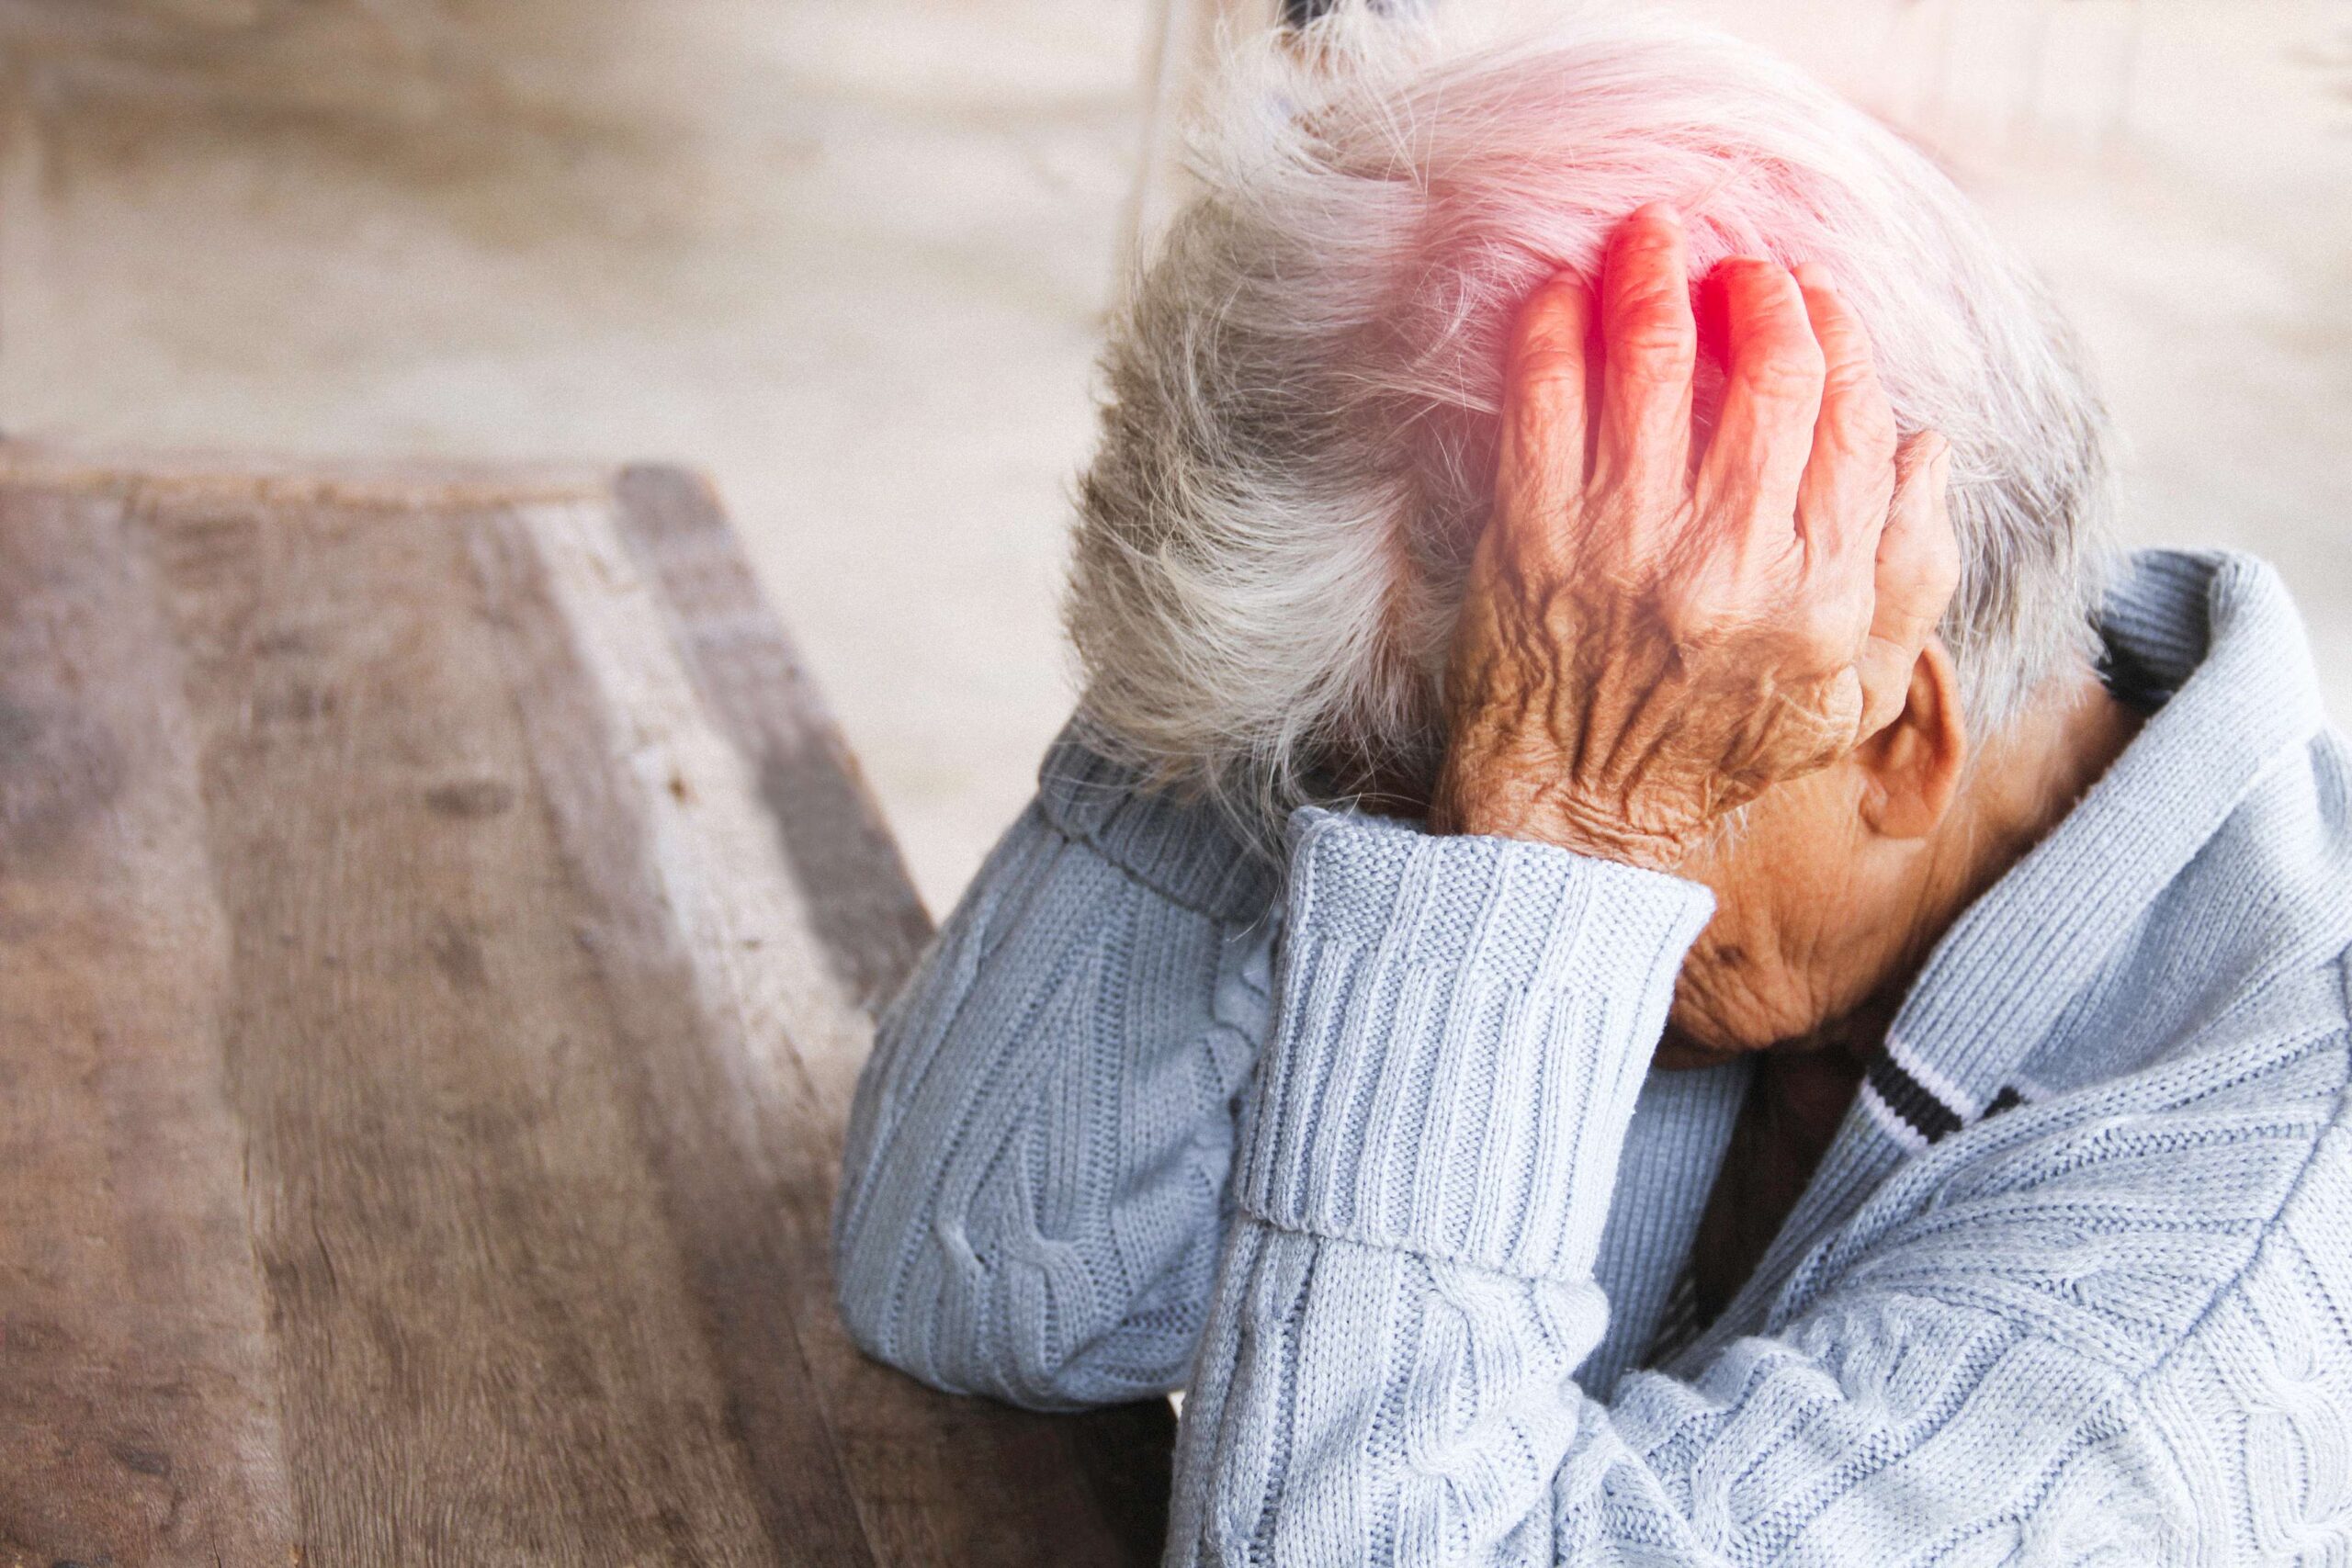 What Are the Warning Signs of Elder Abuse and Neglect